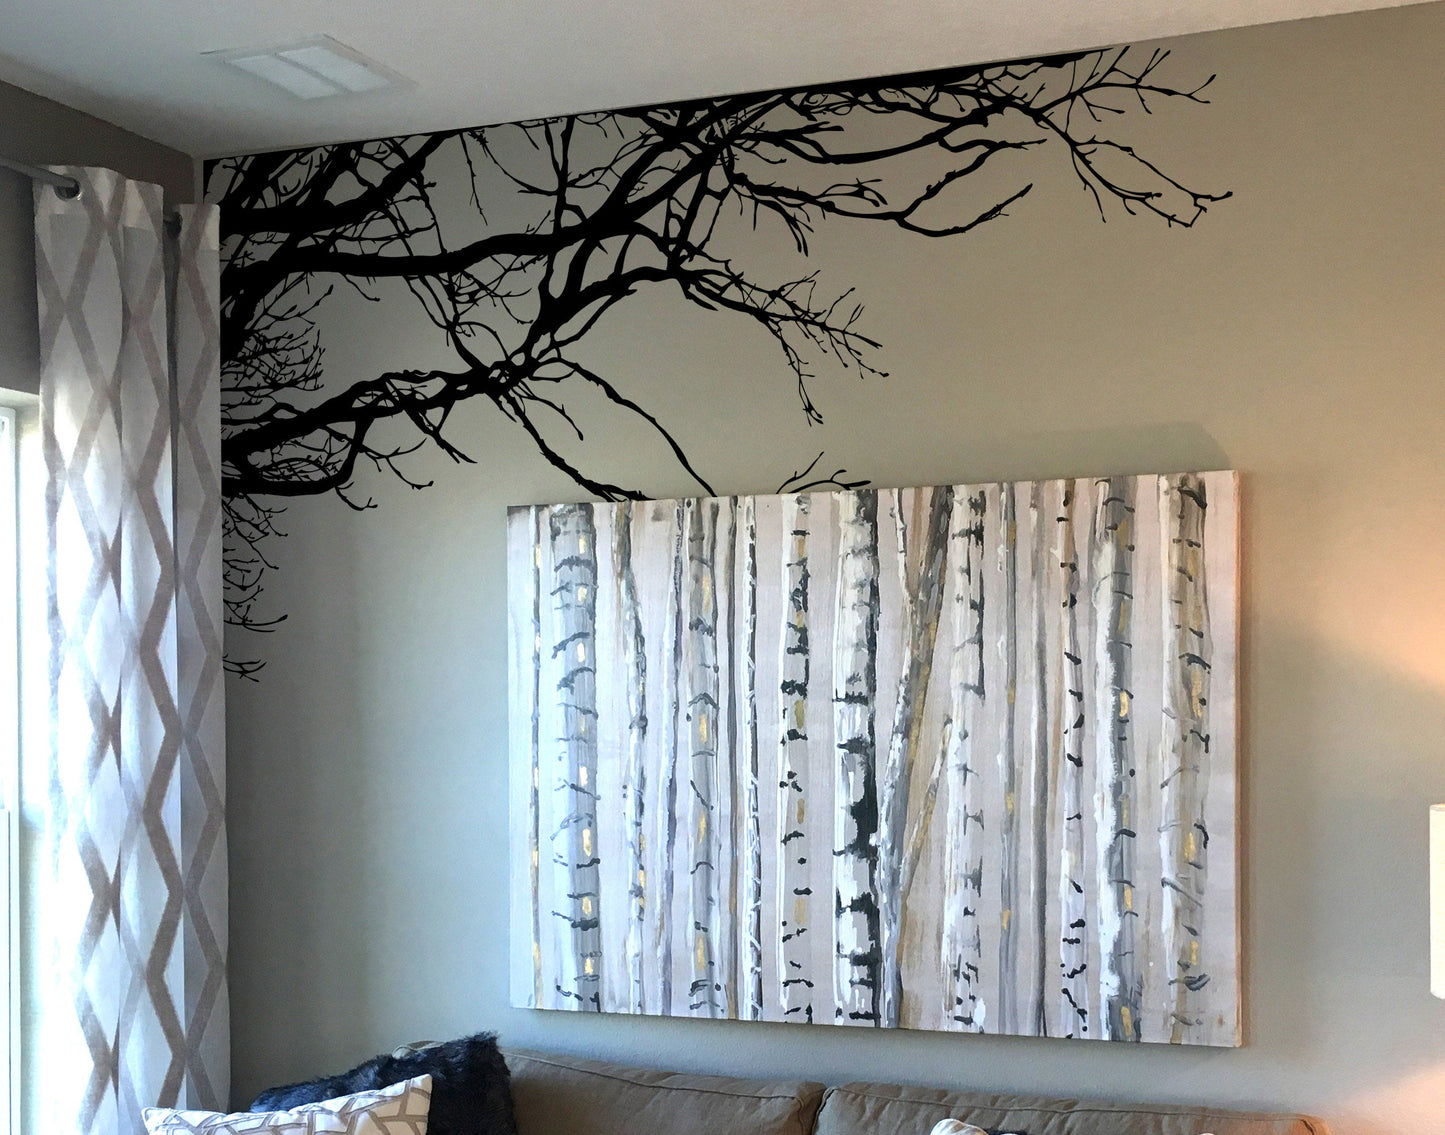 A cozy living room with a tree wall decal, adding a touch of nature to the space.